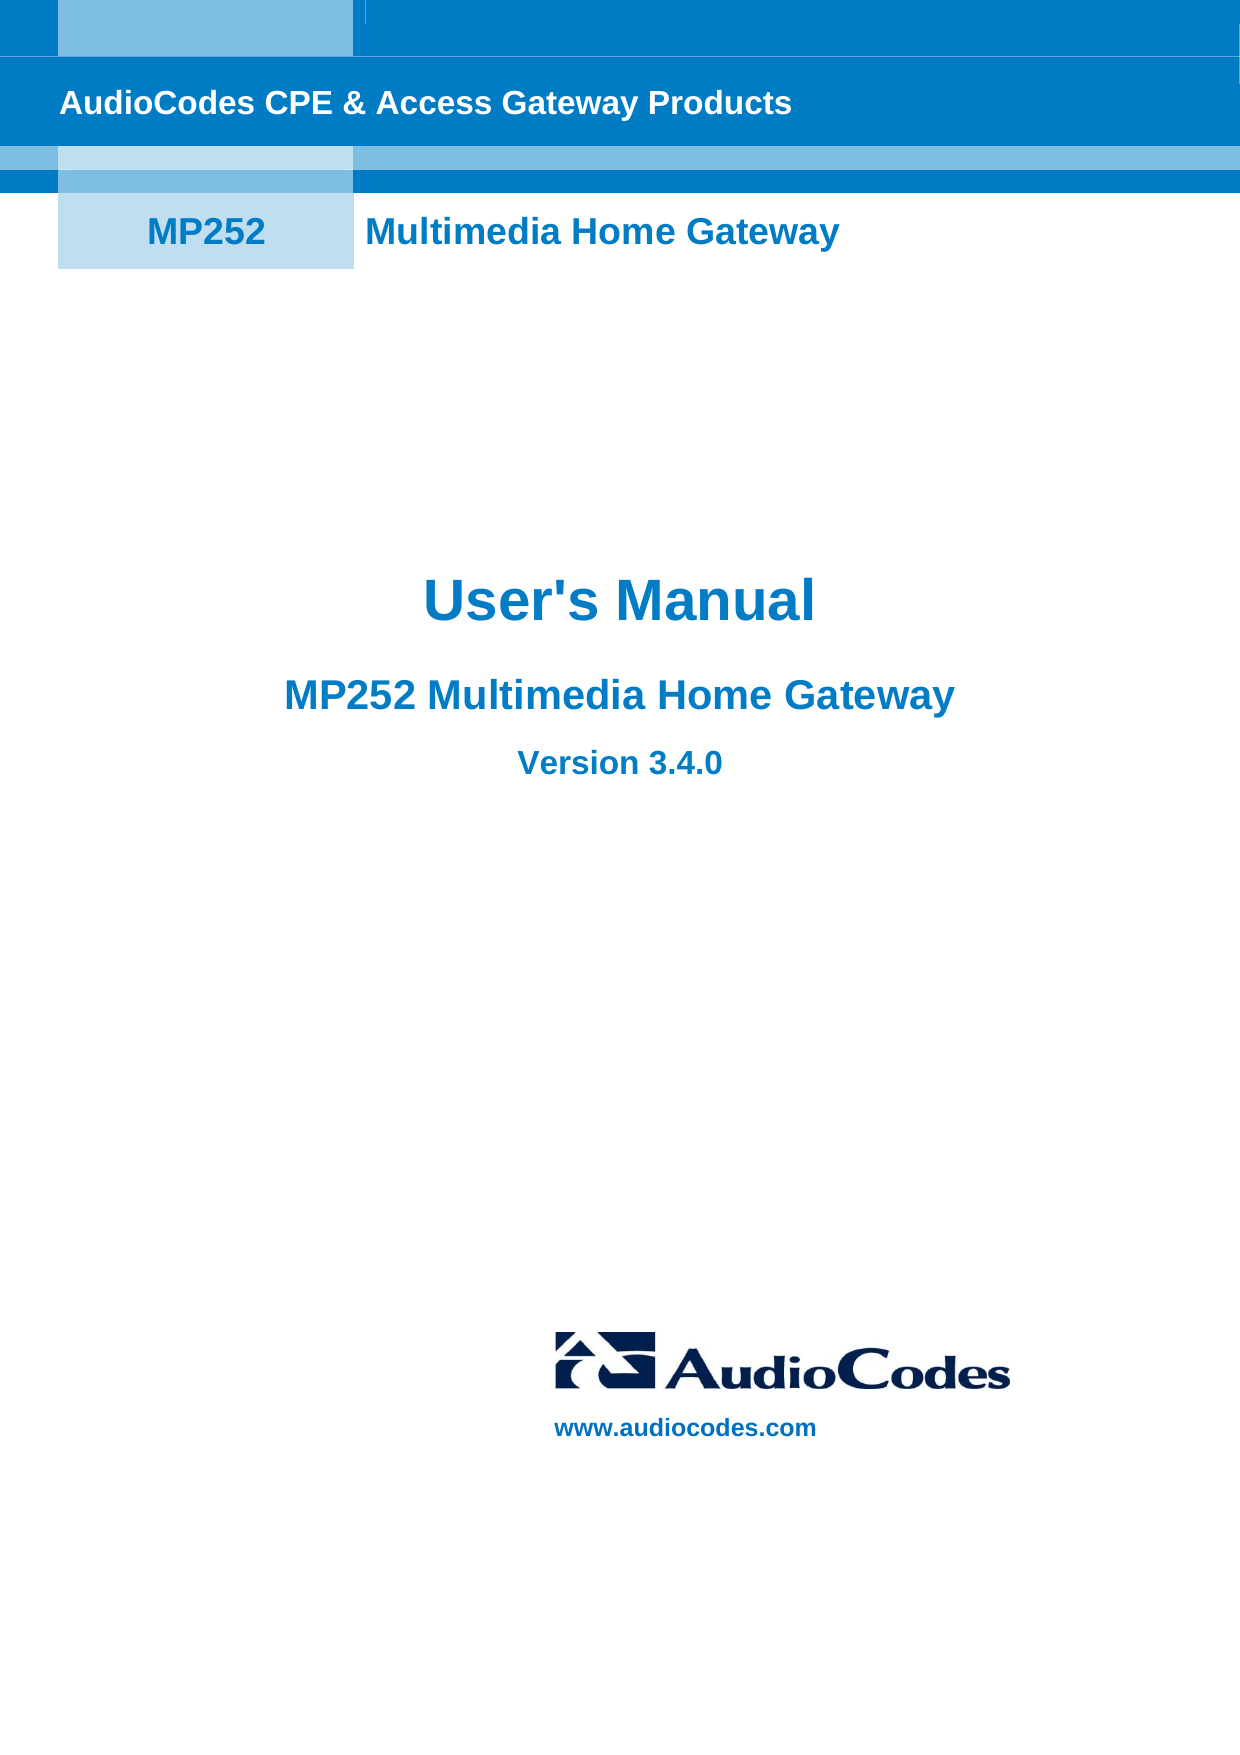    AudioCodes CPE &amp; Access Gateway Products     MP252  Multimedia Home Gateway  User&apos;s Manual MP252 Multimedia Home Gateway Version 3.4.0     www.audiocodes.com 